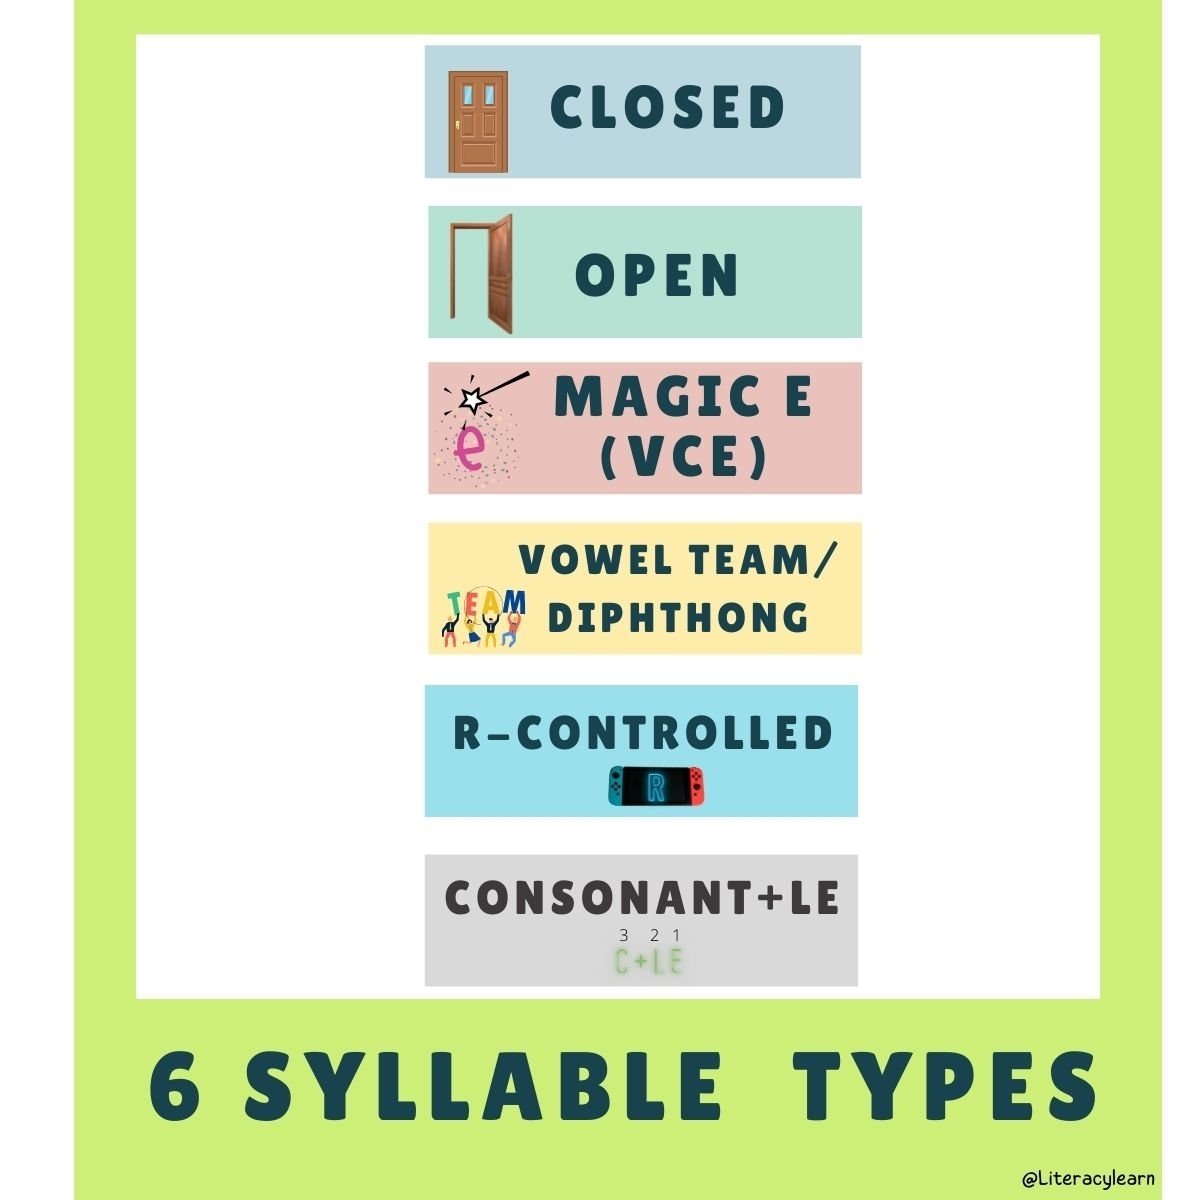 A bright graphic with the 6 syllable types listed along with matching pictures.